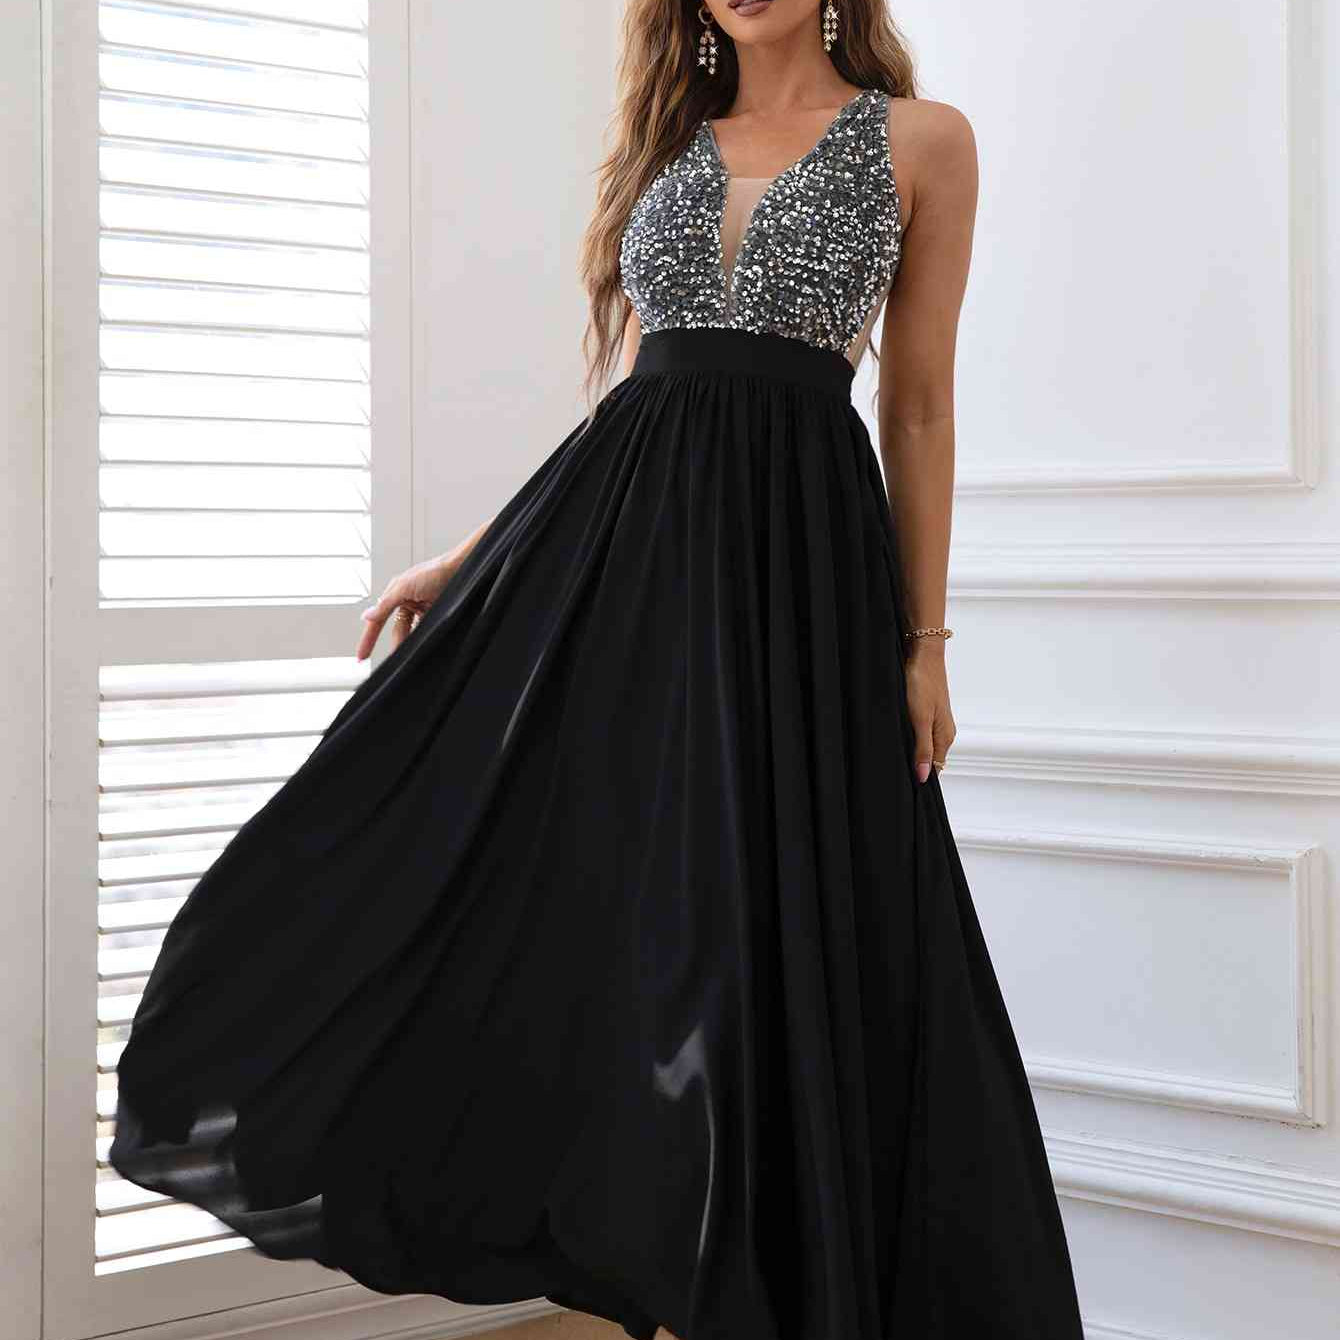 Contrast Sequin Sleeveless Maxi Dress - Analia's Boutiques